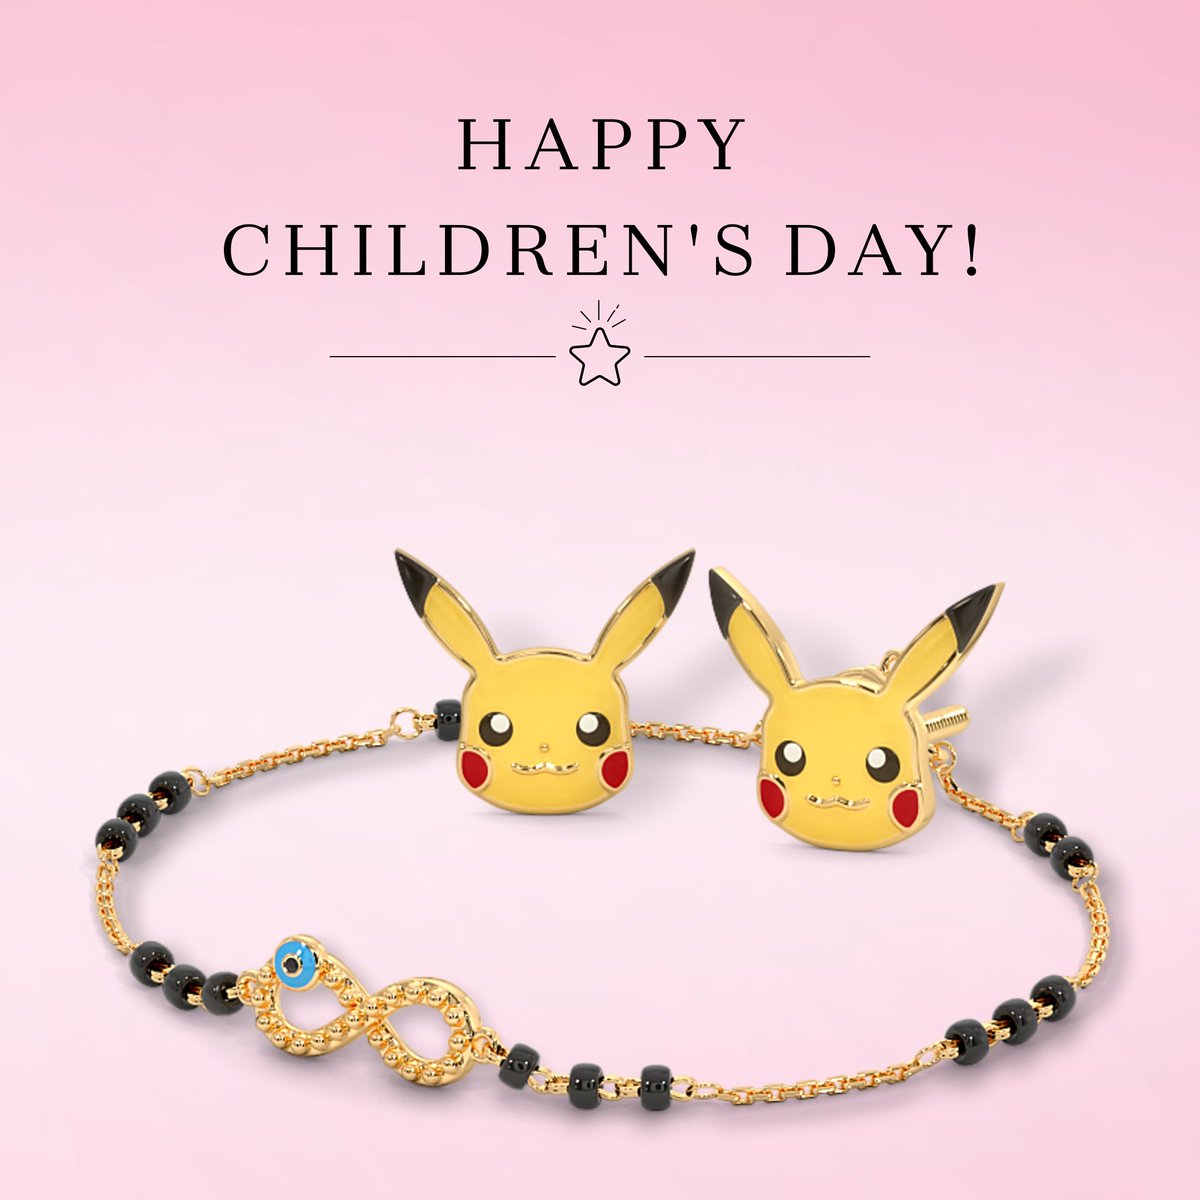 Exquisite jewels for your precious ones this #ChildrensDay!✨
🔗Shop kids jewellry: bitly.ws/32gam

#FineJewellery #KidsJewellery #Gold #Diamonds #TuesdayFeeling #BlueStone